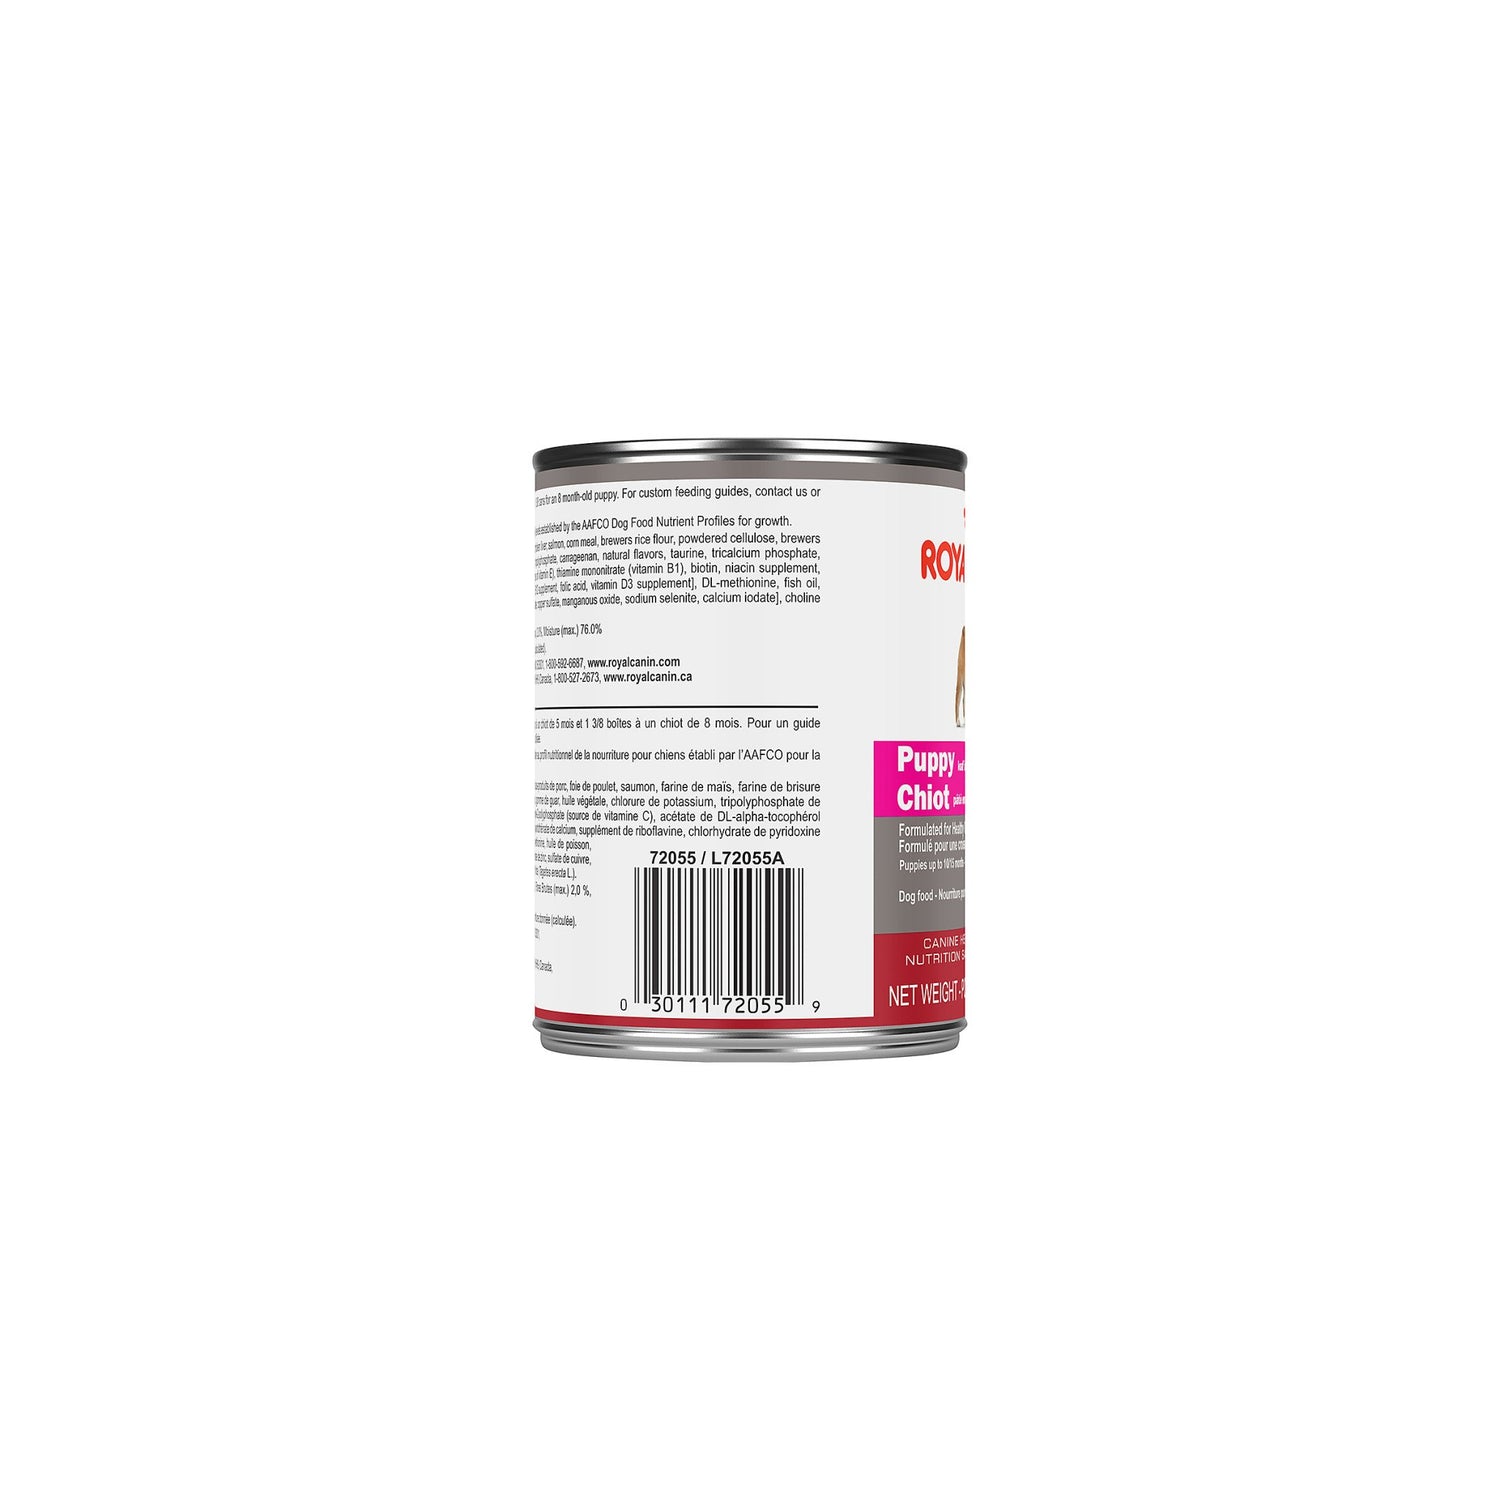 Royal Canin® Canine Health Nutrition™ Puppy Canned Puppy Food